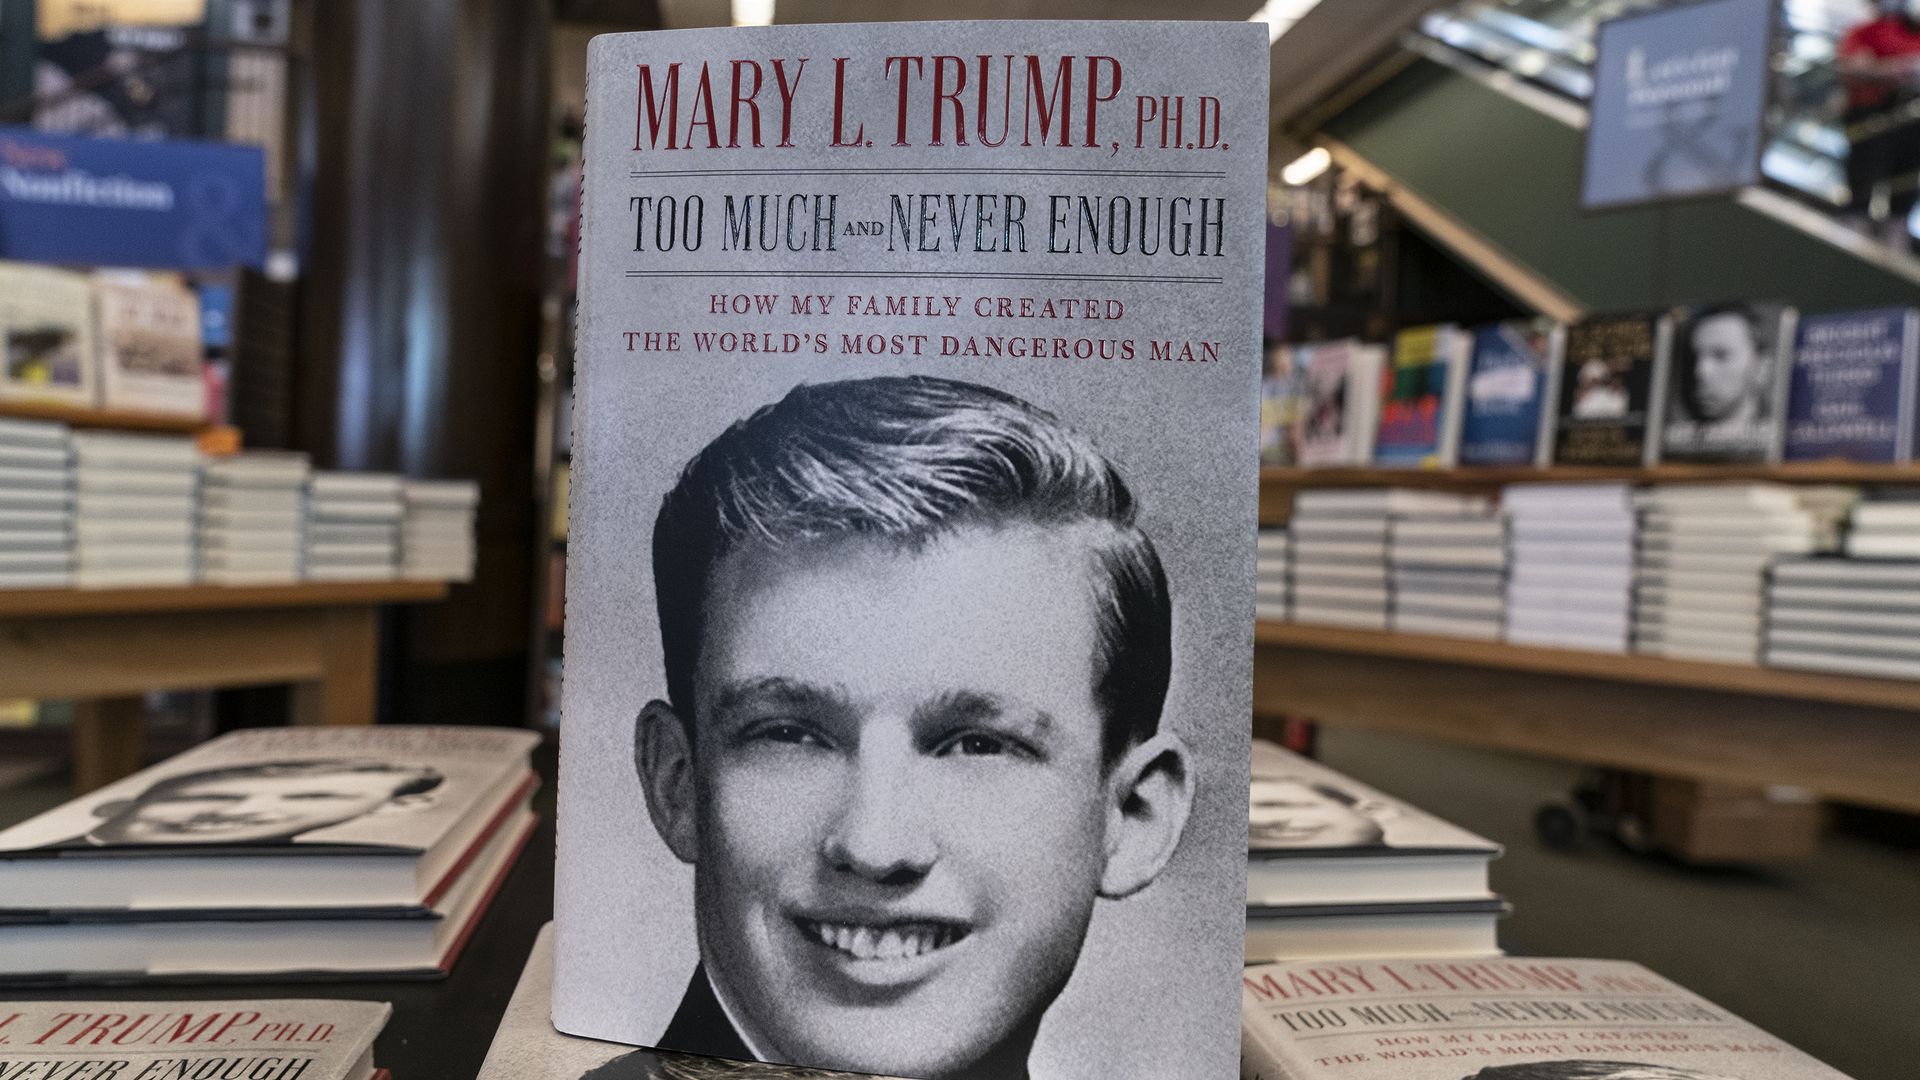 Mary Trump's book is propped on top of a larger stack of books 